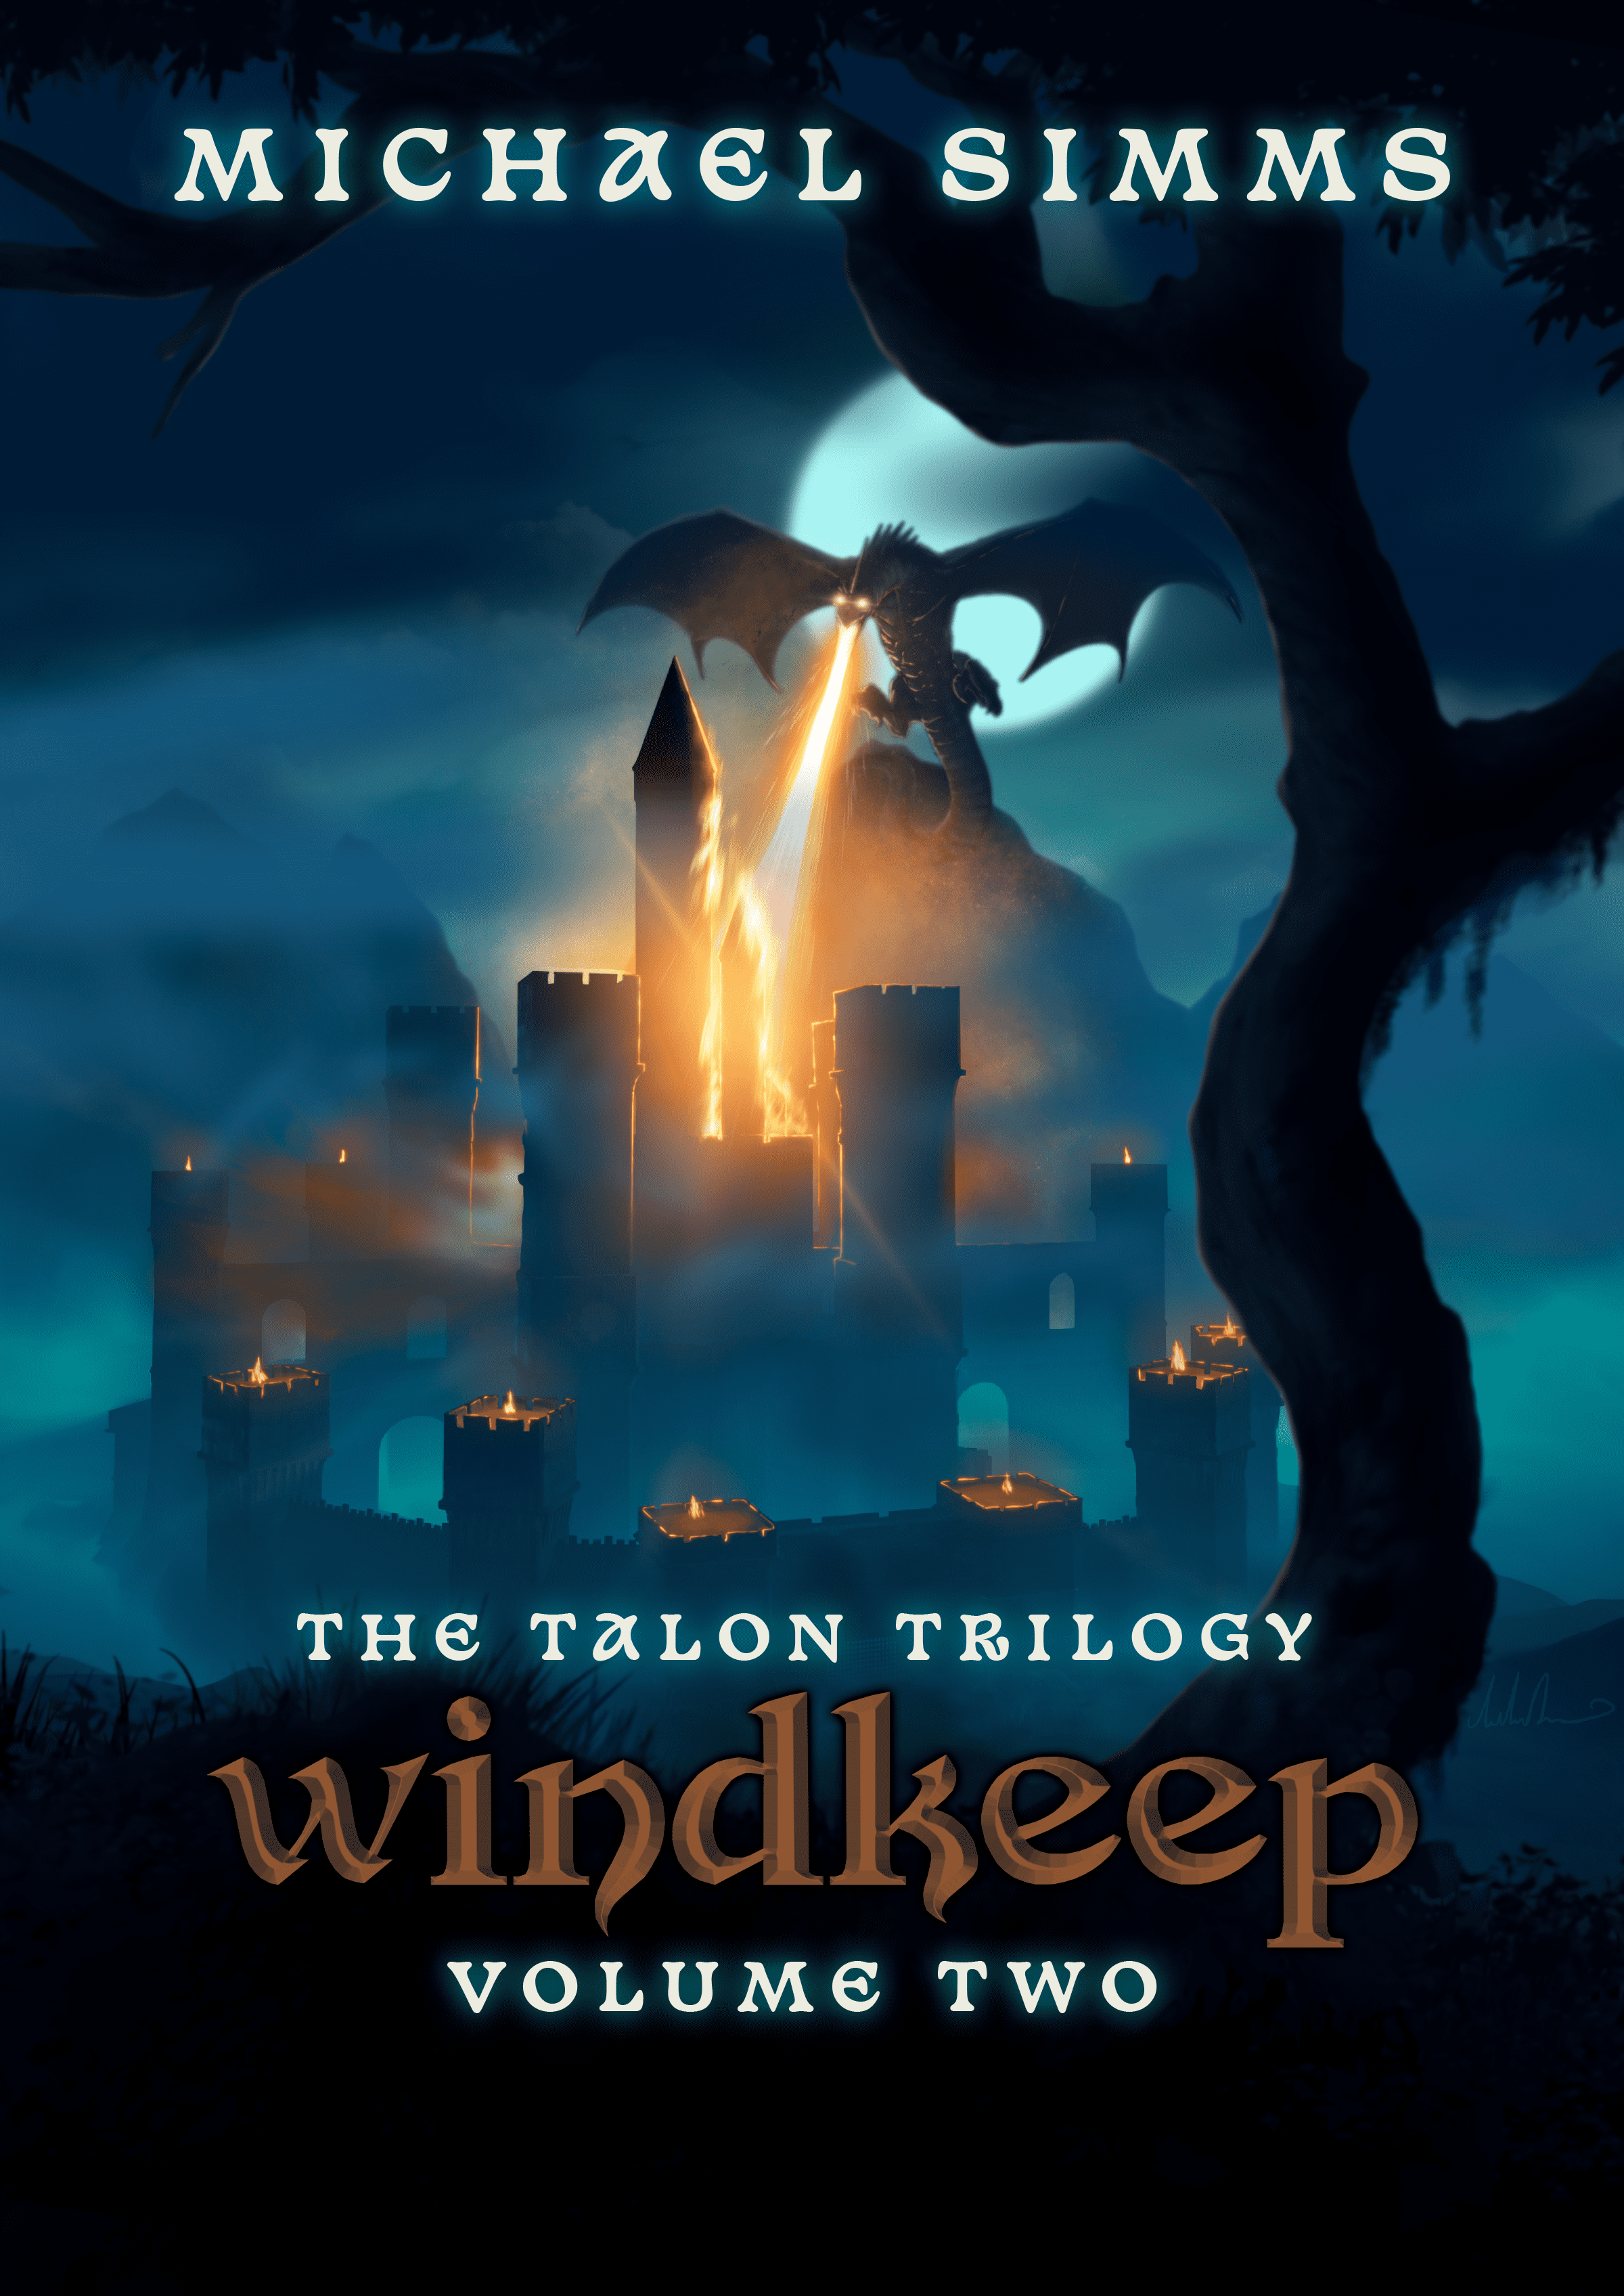 Windkeep by Michael Simms, book two in the Talon Trilogy. Coming January 2024. Cover art by Andrew Dunn shows a flying dragon setting fire to a castle.